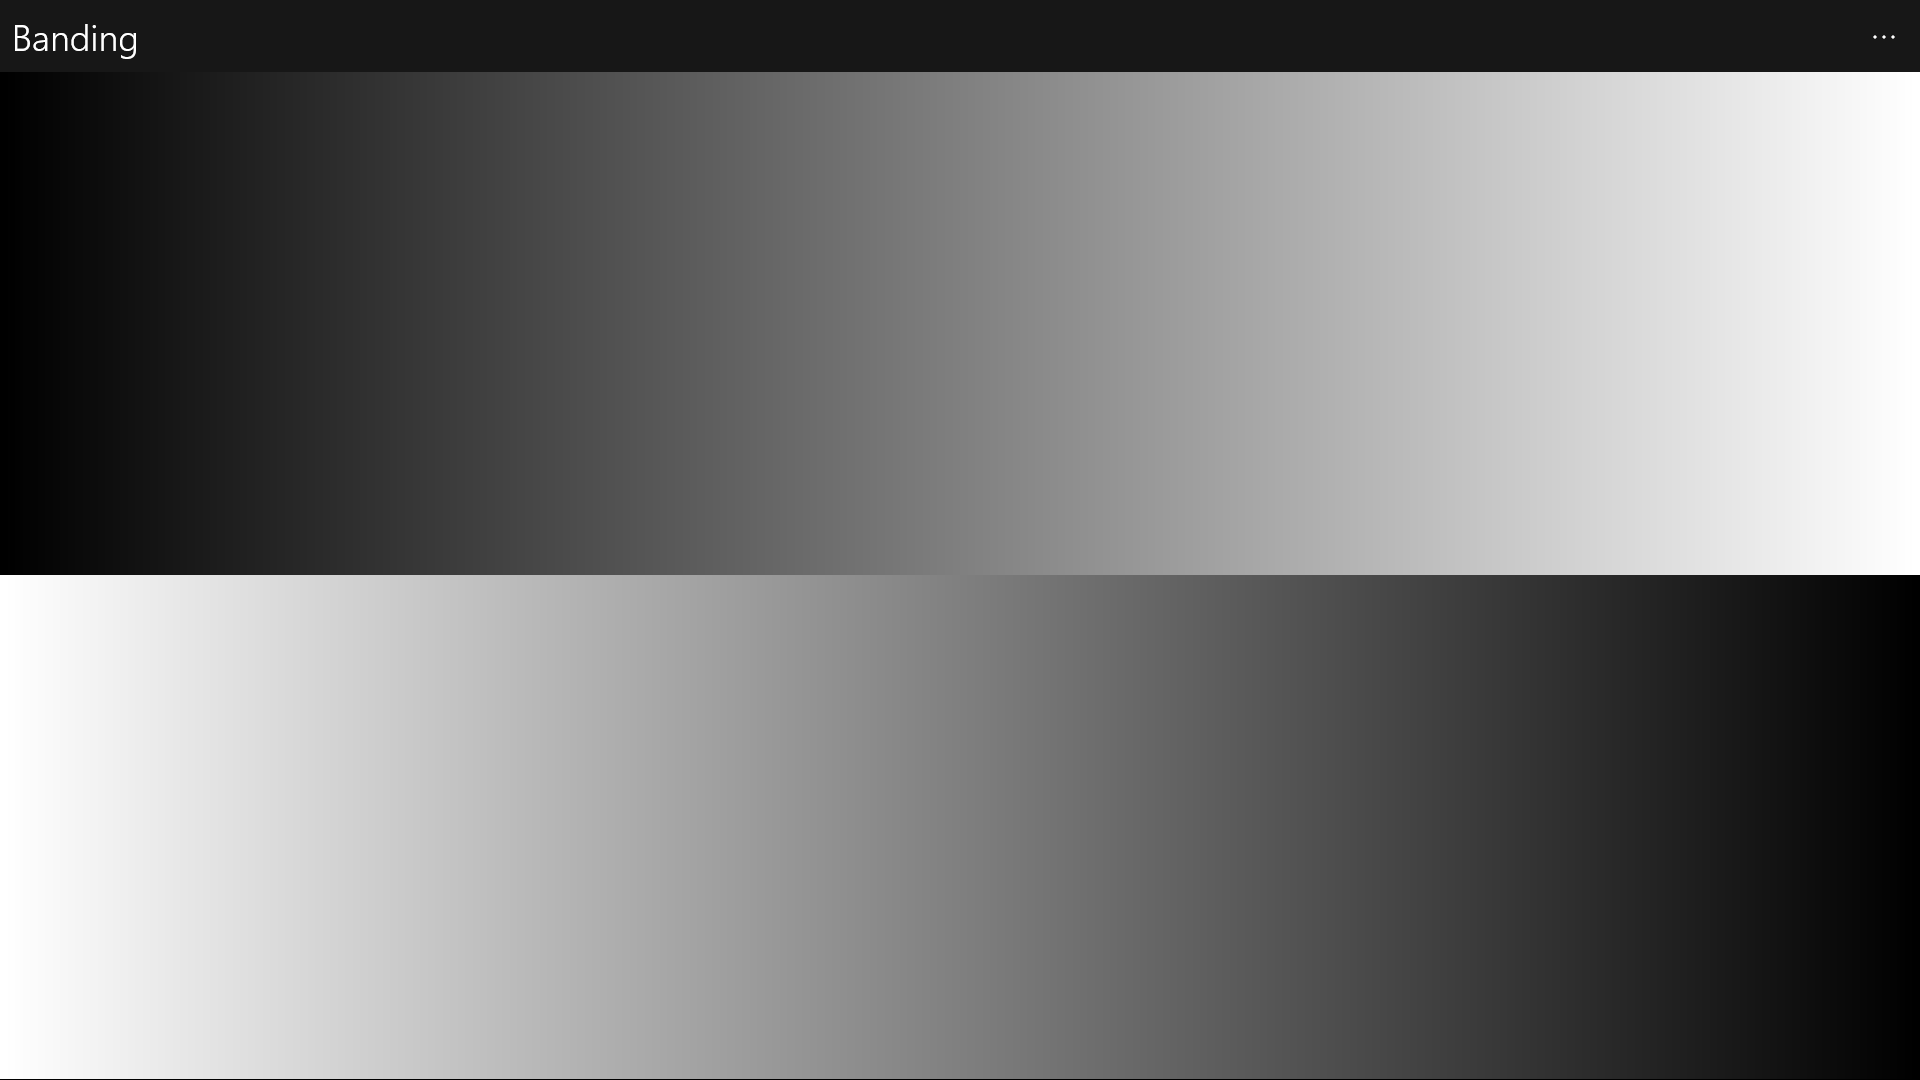 The banding page displays a gray-scale gradient image to help you test for banding.